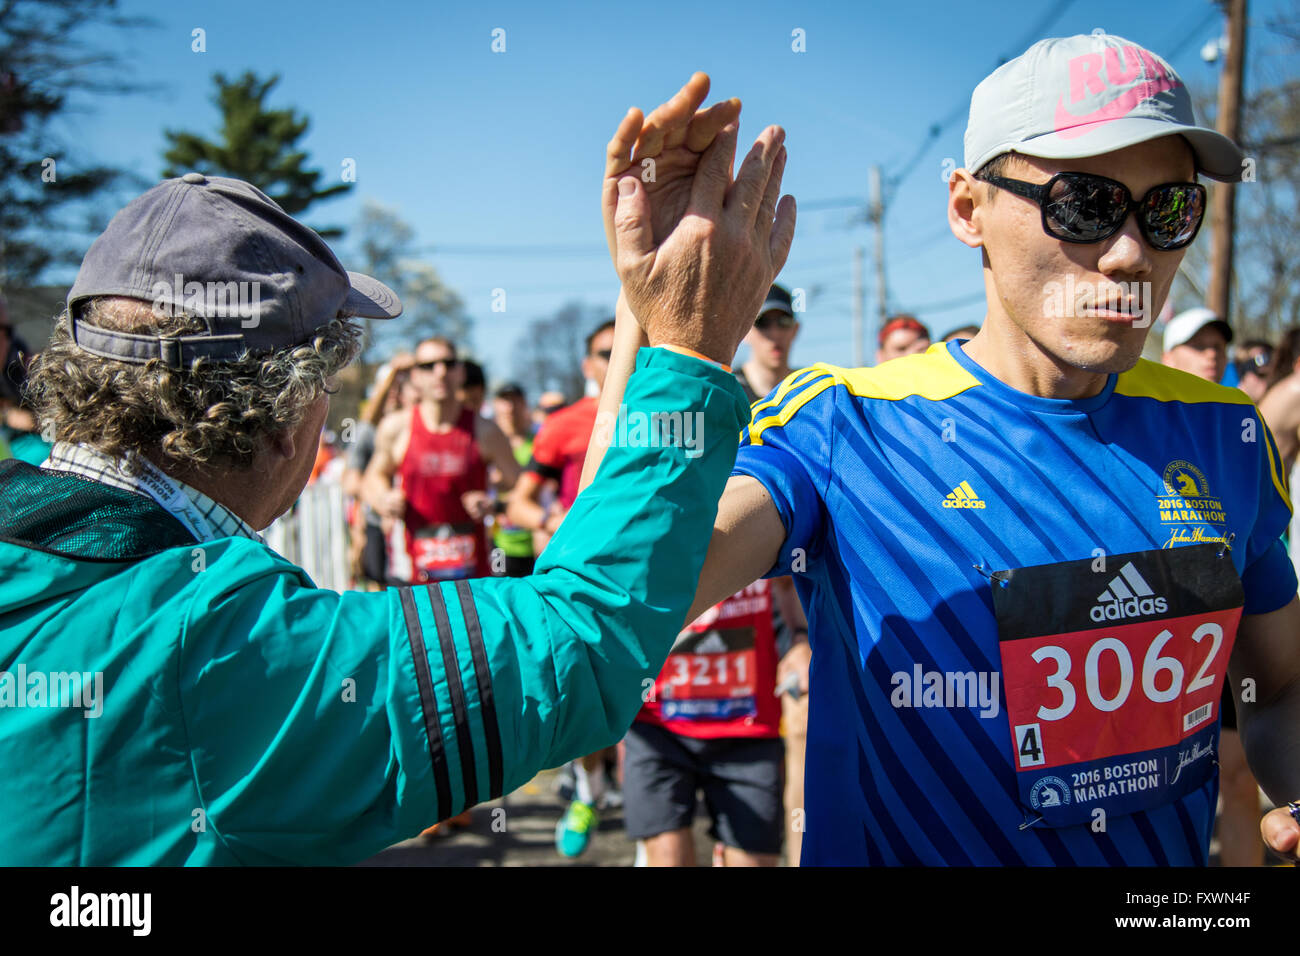 Hopkinton, MA, USA. 18th April, 2016. Moments after the starting gun, the Elite Men and Wave 1 fields embark upon the course into Boston. John Kavouris/Alamy Live News. Stock Photo